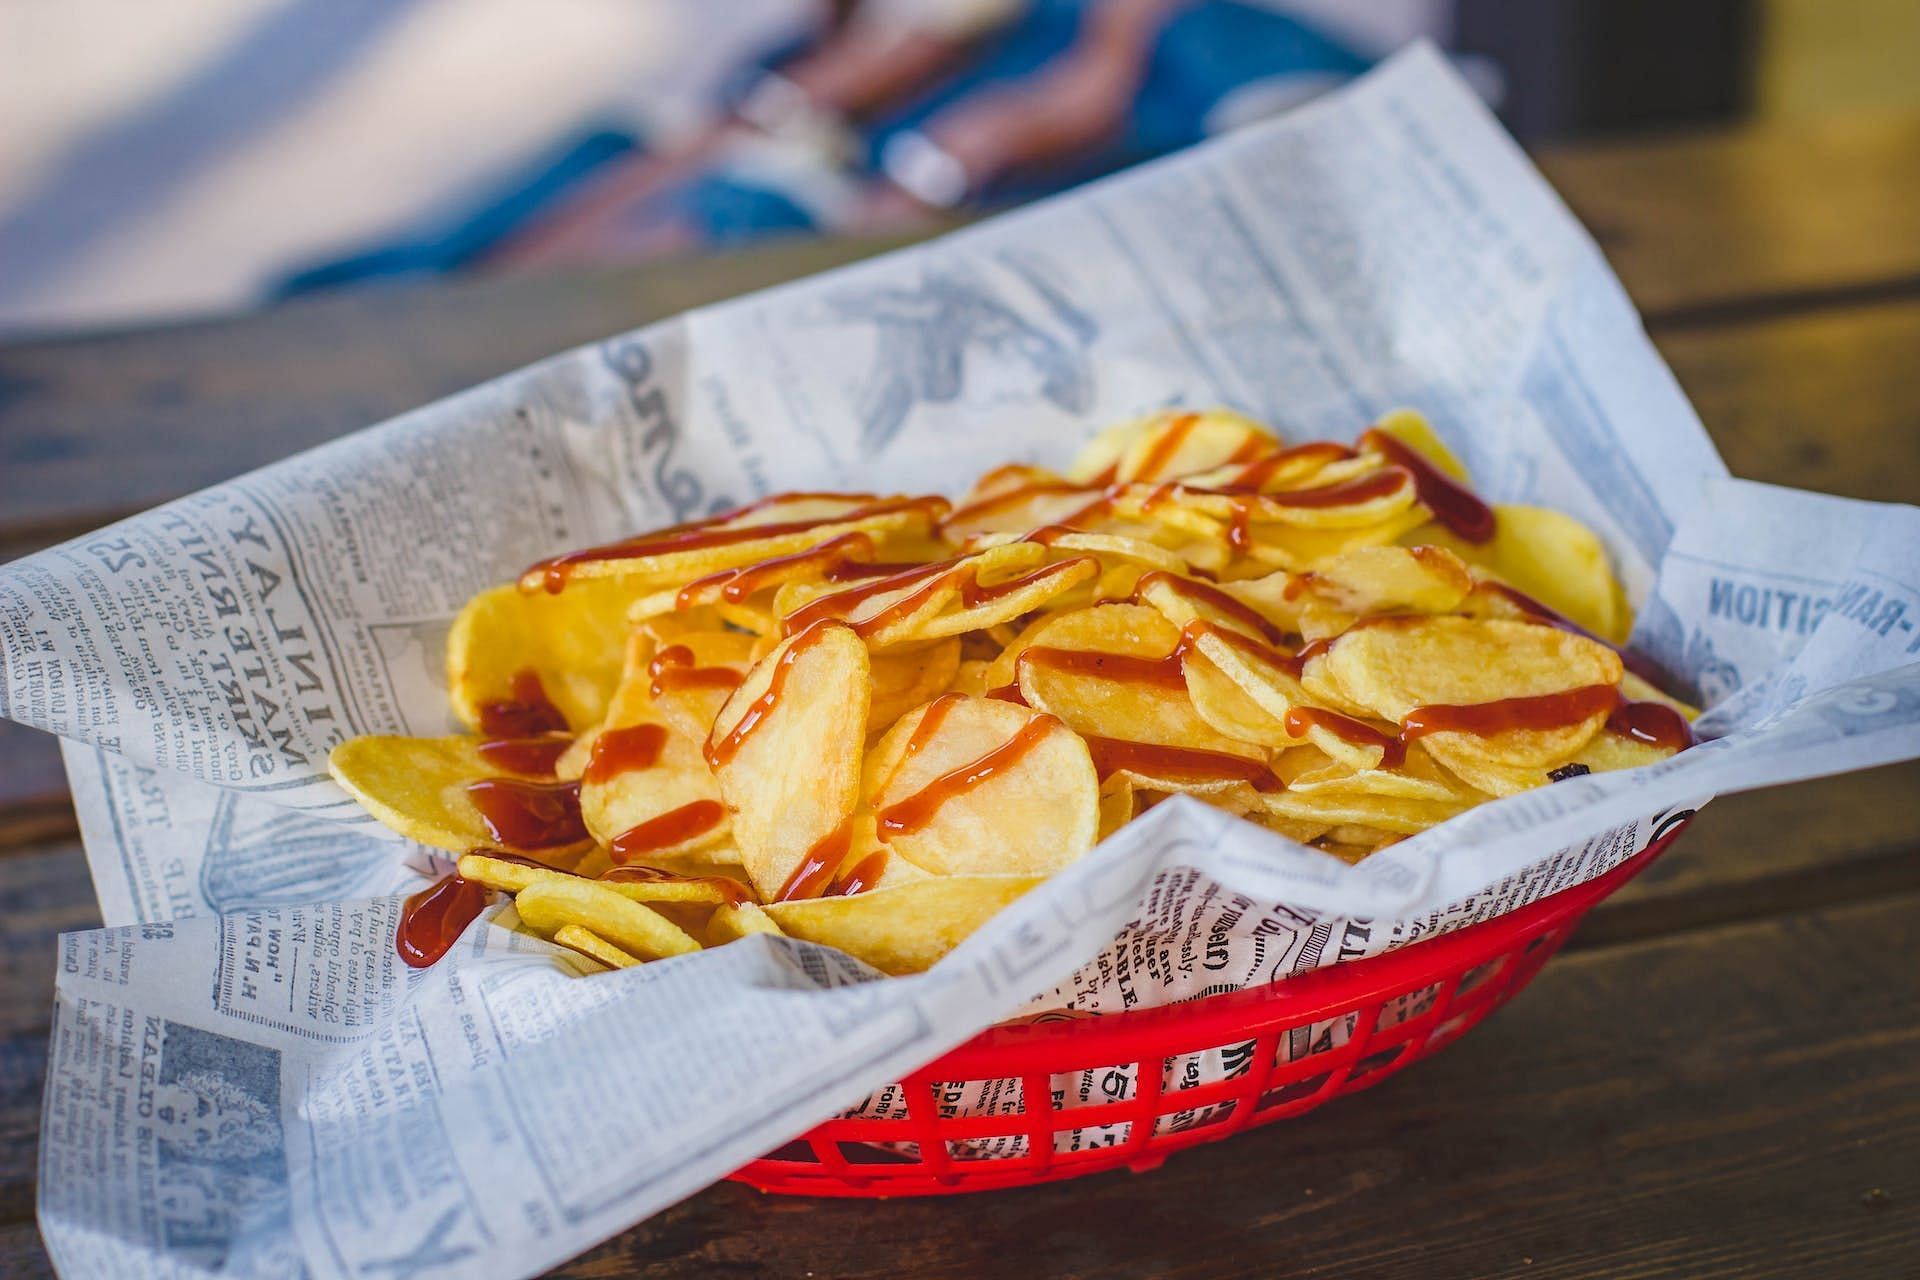 The starch in chips can cause plaque build up. (Image via Pexels/Valeria Boltneva)